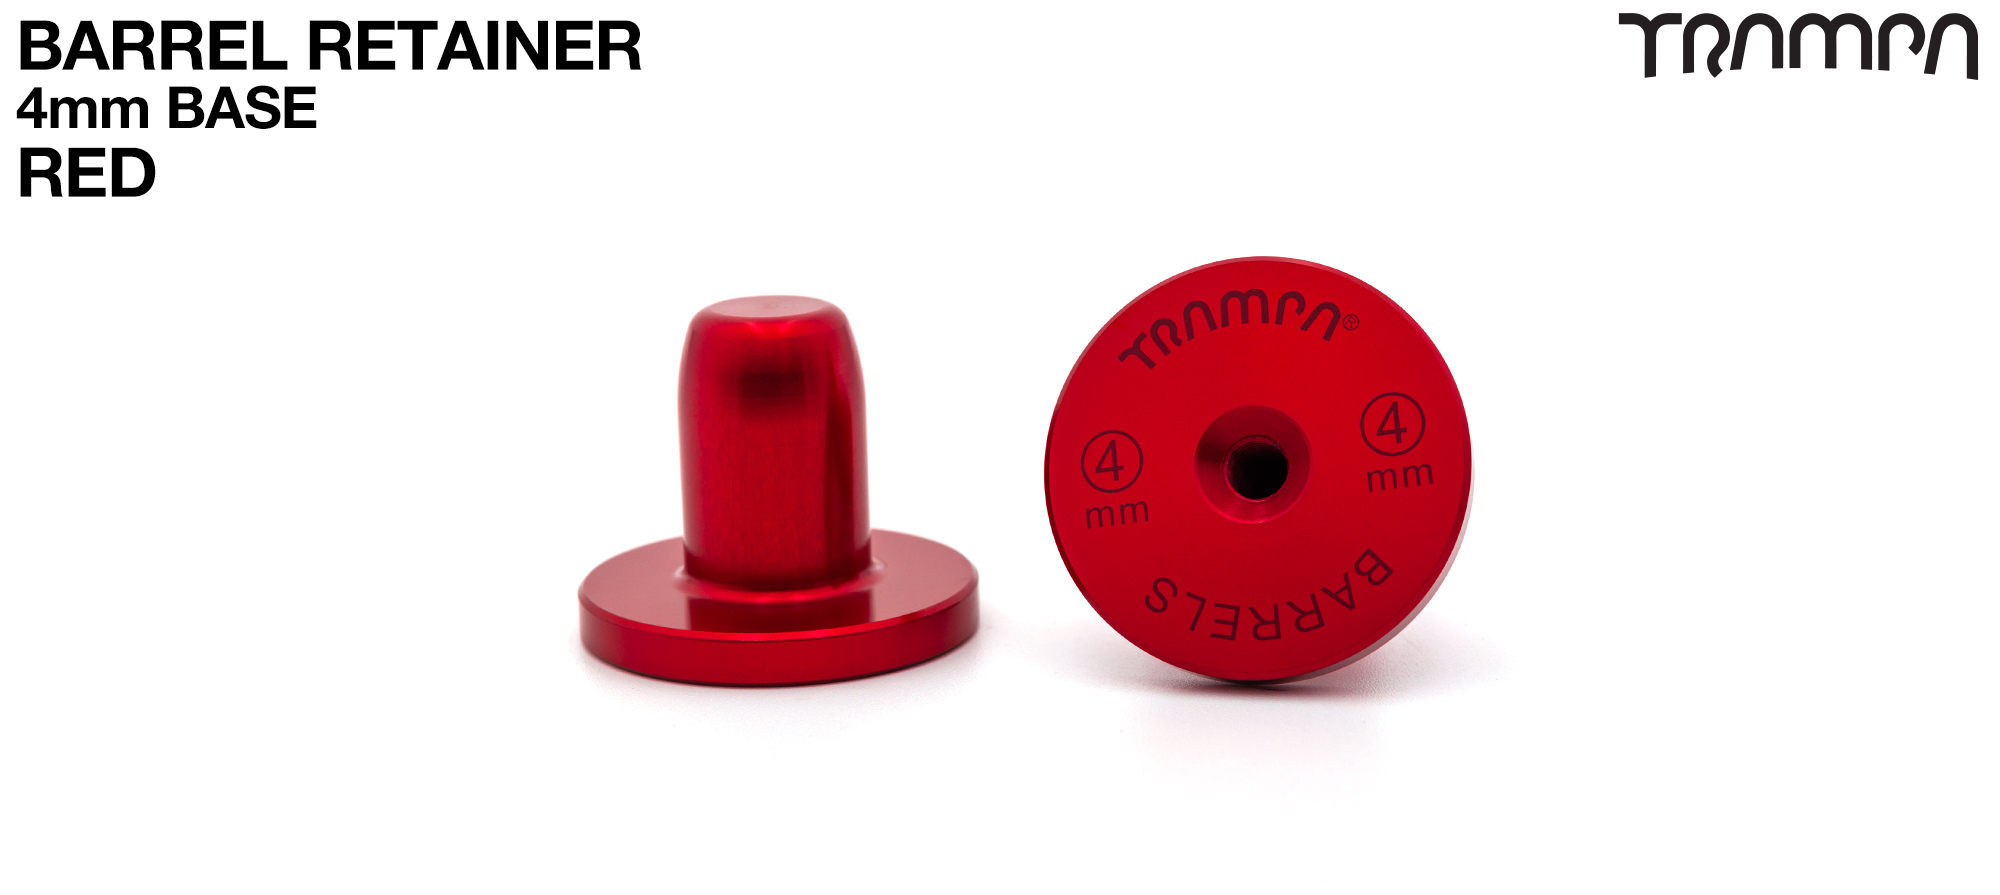 RED 4mm Barrel Retainers 